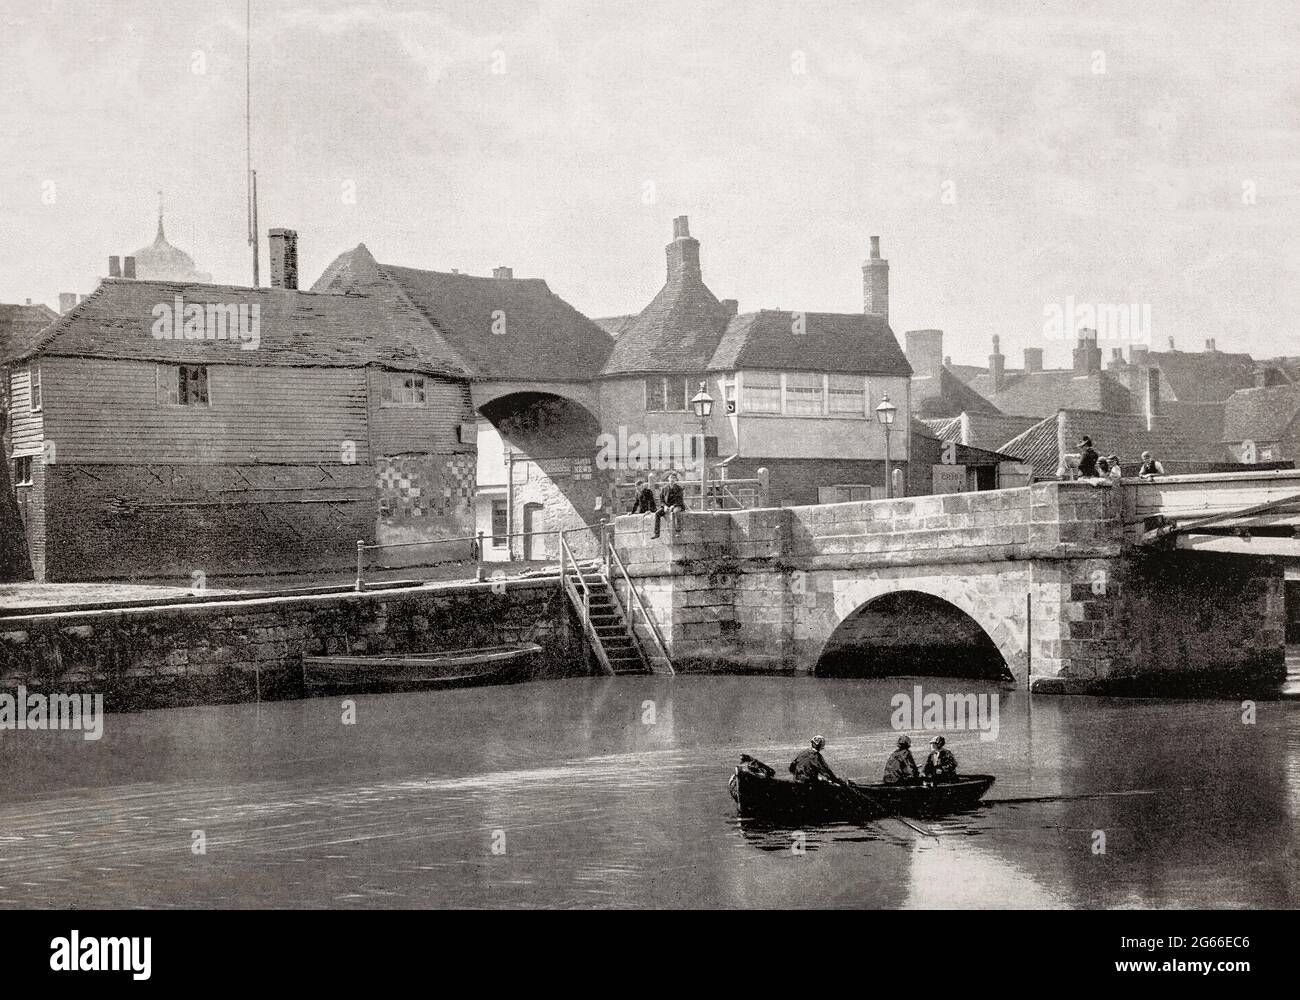 A late 19th century view of the River Stour and the 14th century Barbican gateway built in the late 14th century and later occupied by the toll collector for the Sandwich Toll Bridge, in Sandwich, Kent, England. Sandwich was one of the Cinque Ports and also gave its name to the food by way of John Montagu, 4th Earl of Sandwich, and the word sandwich is now found in several languages. Stock Photo